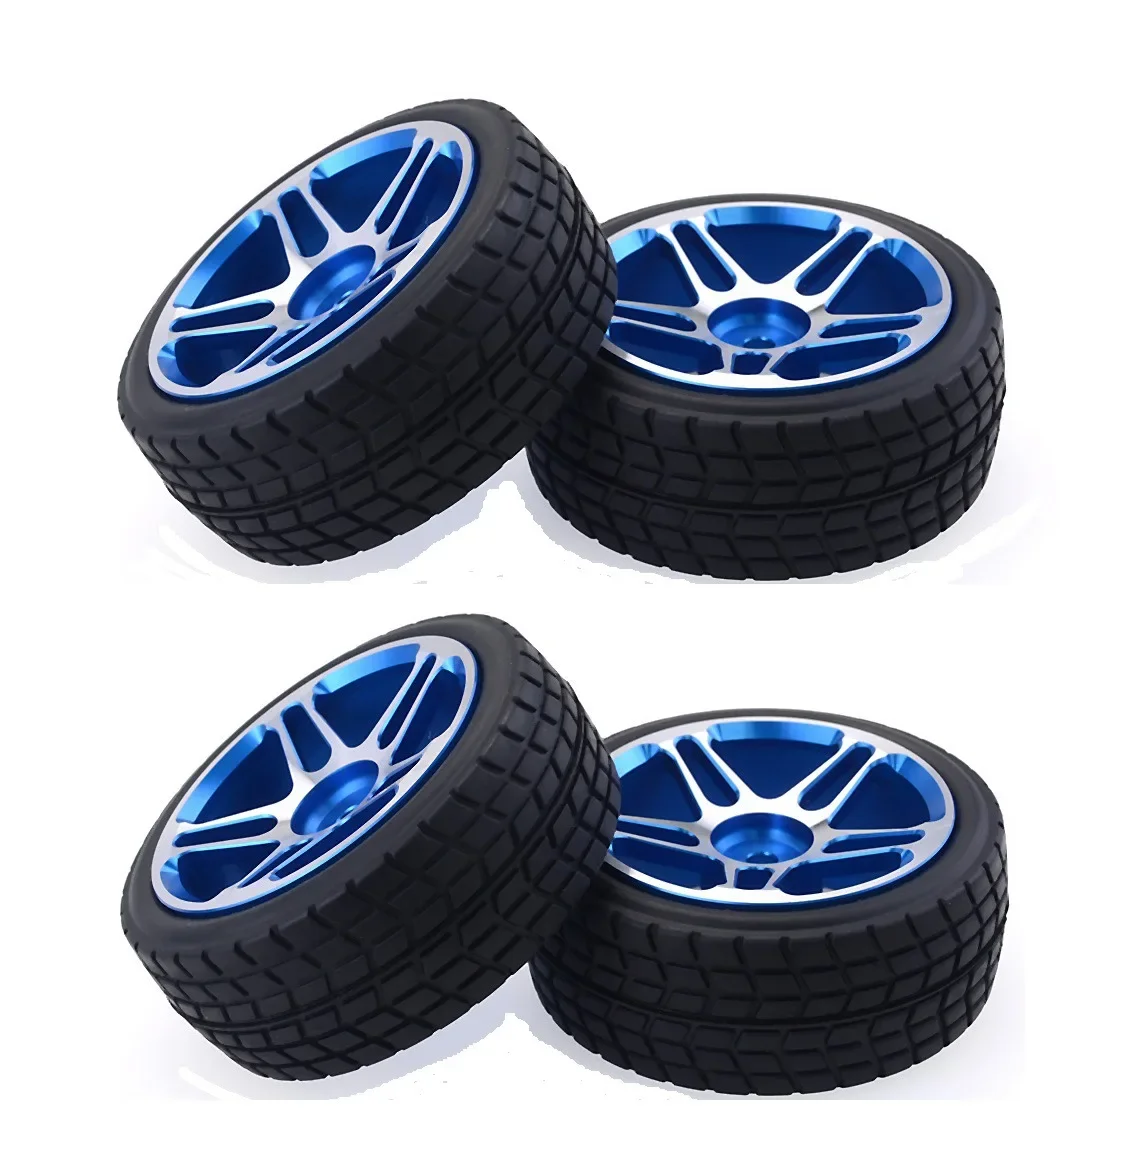 

4pcsSuitable for WLToys 1:12 1:14 1:18 RC car accessories 124016 124017 124018 124019 144001 A959 and other metal upgrade wheels